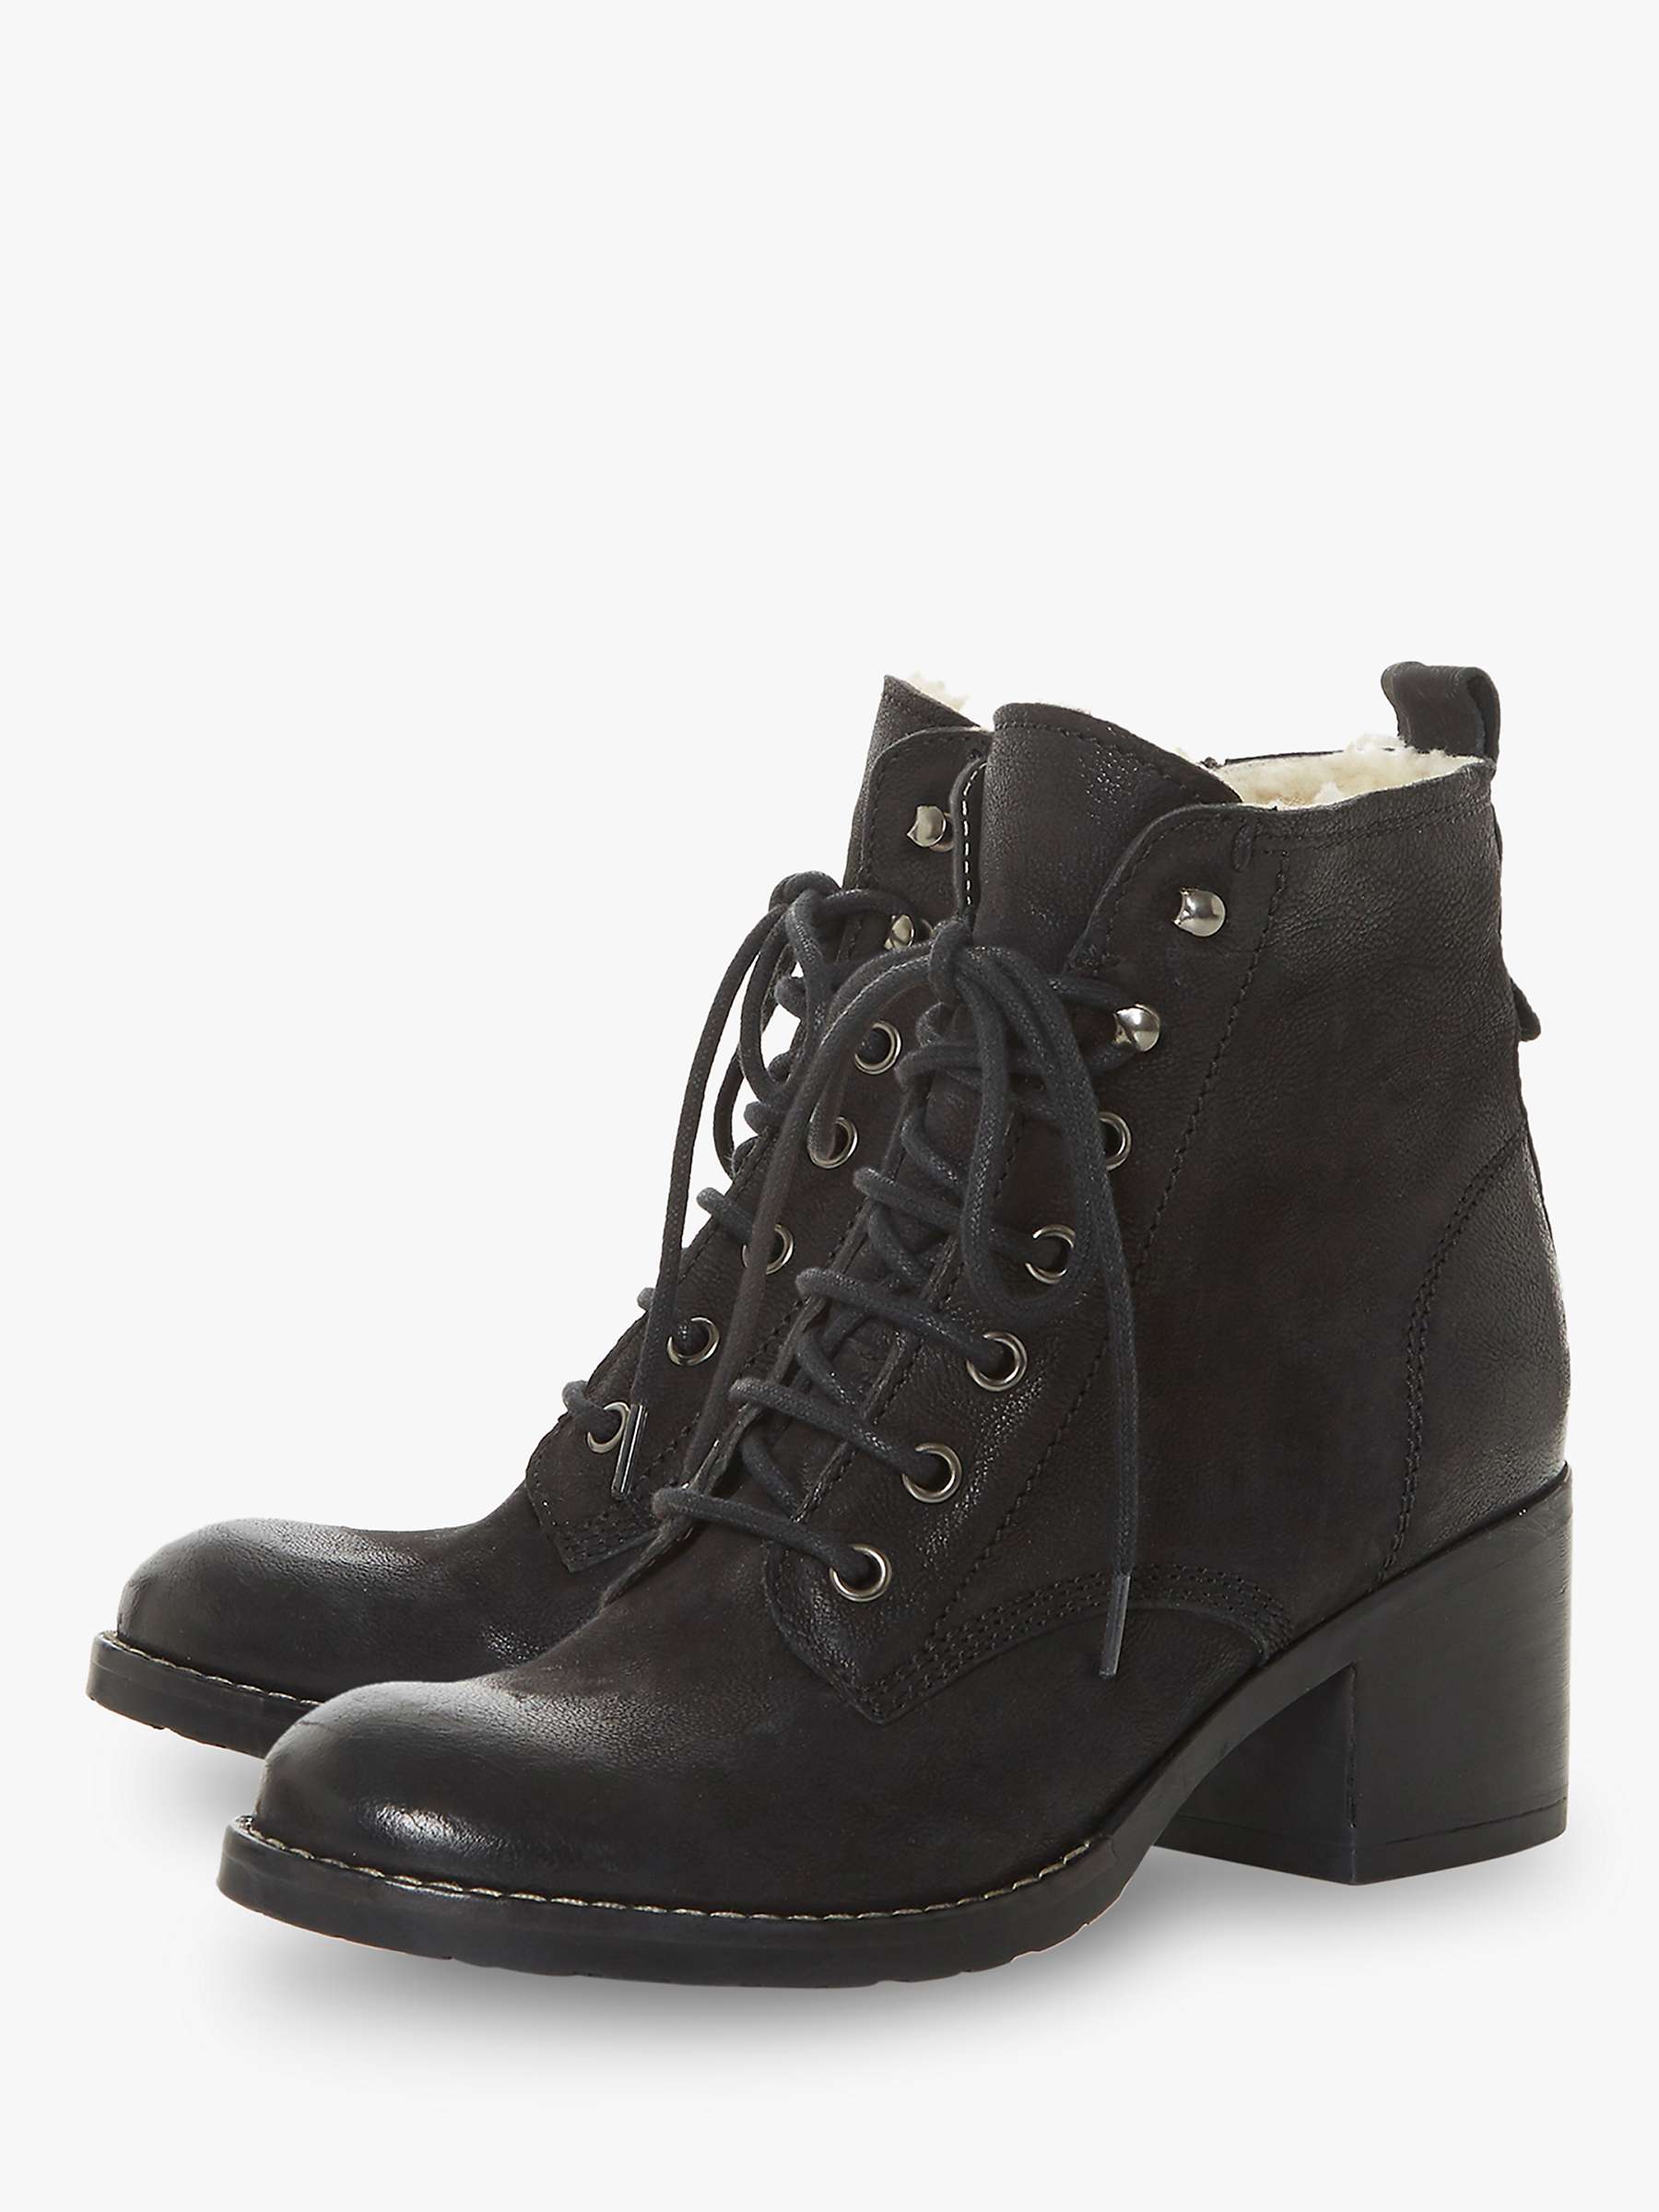 Buy Dune Patsie D Leather Lace Up Ankle Boots, Black Nubuck Online at johnlewis.com